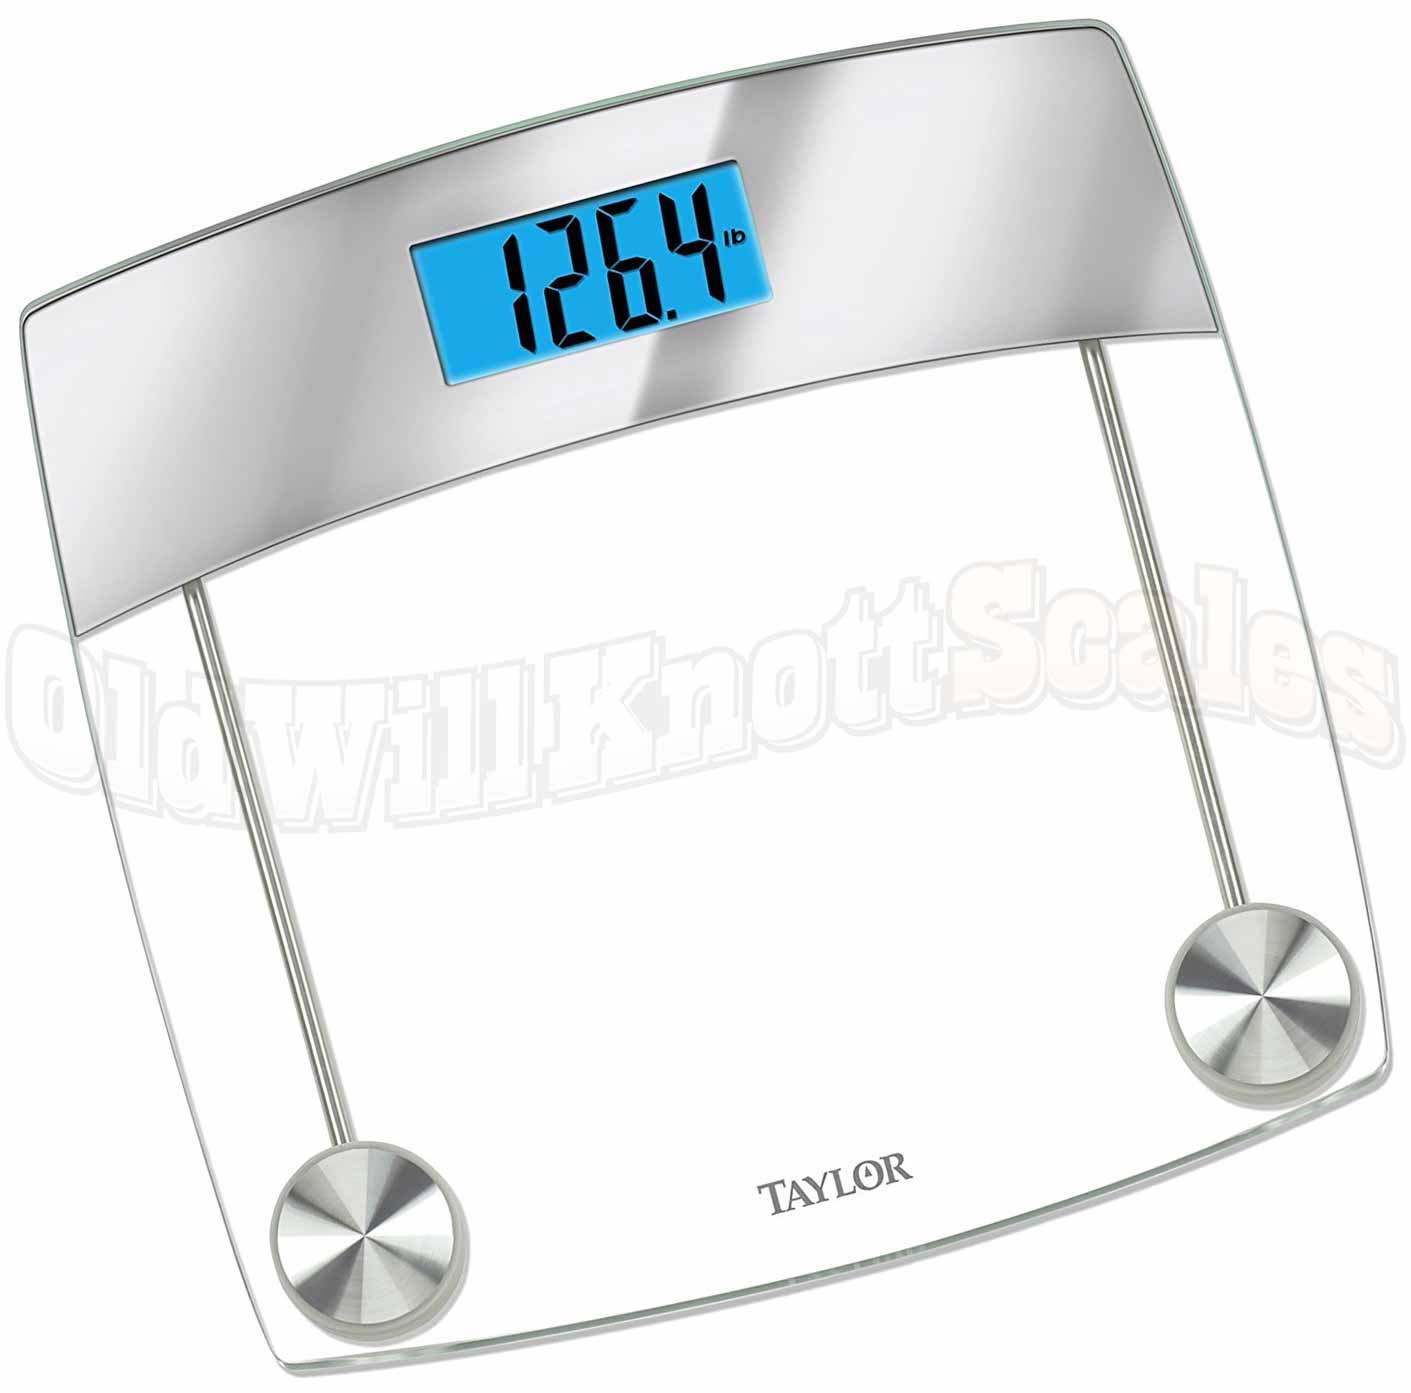 Taylor - 7524 - Digital Bathroom Scale with Glass Platform and Mirror Accent